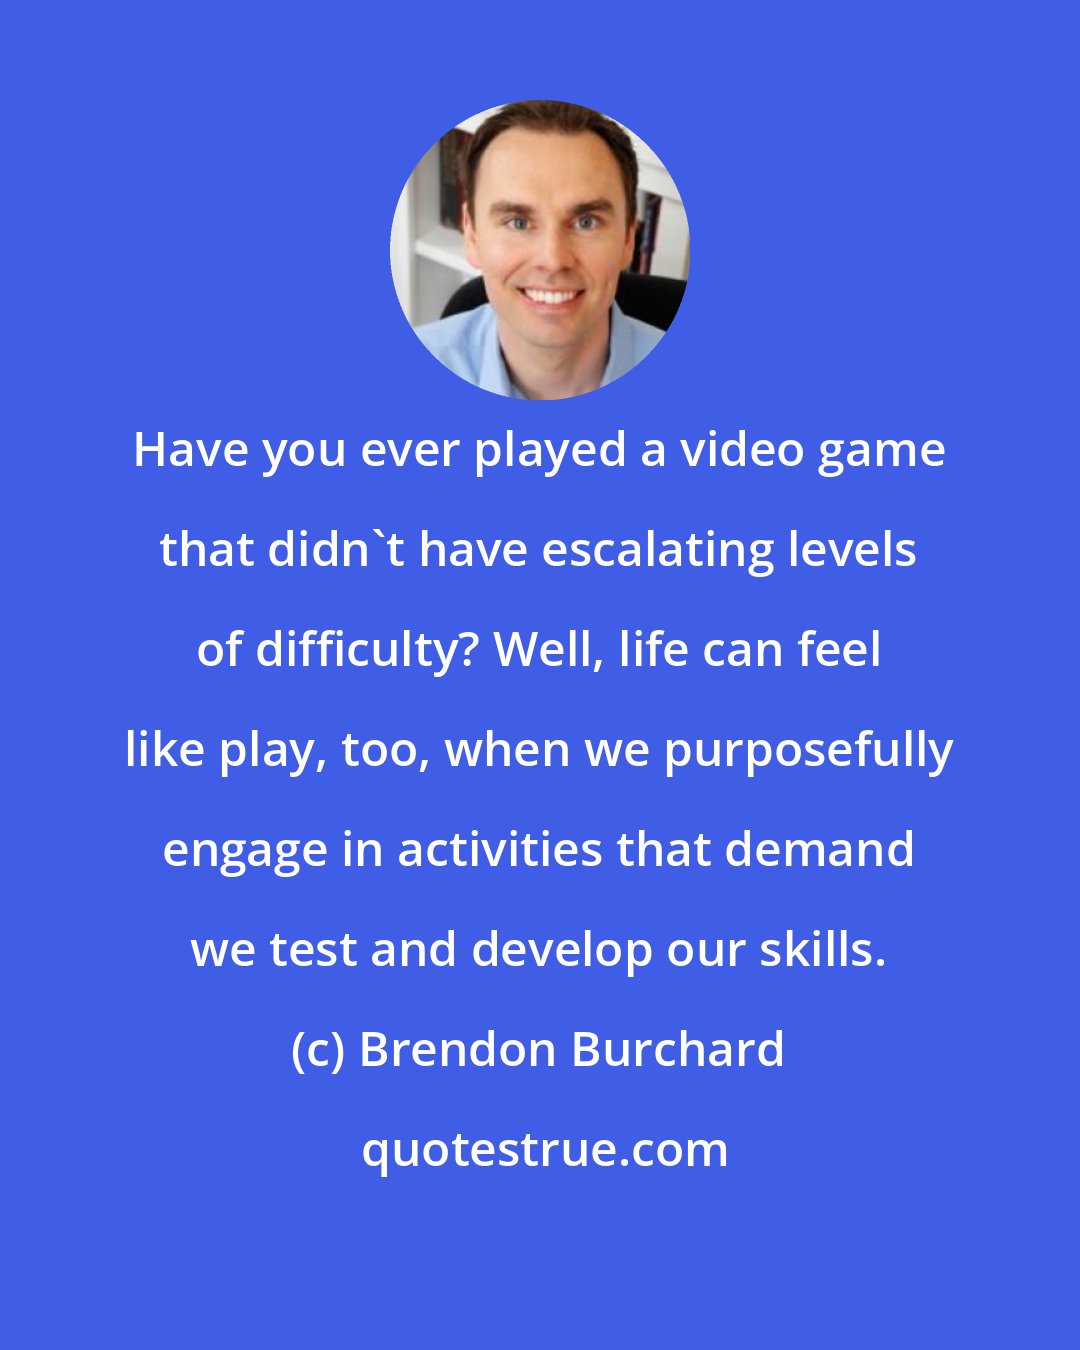 Brendon Burchard: Have you ever played a video game that didn't have escalating levels of difficulty? Well, life can feel like play, too, when we purposefully engage in activities that demand we test and develop our skills.